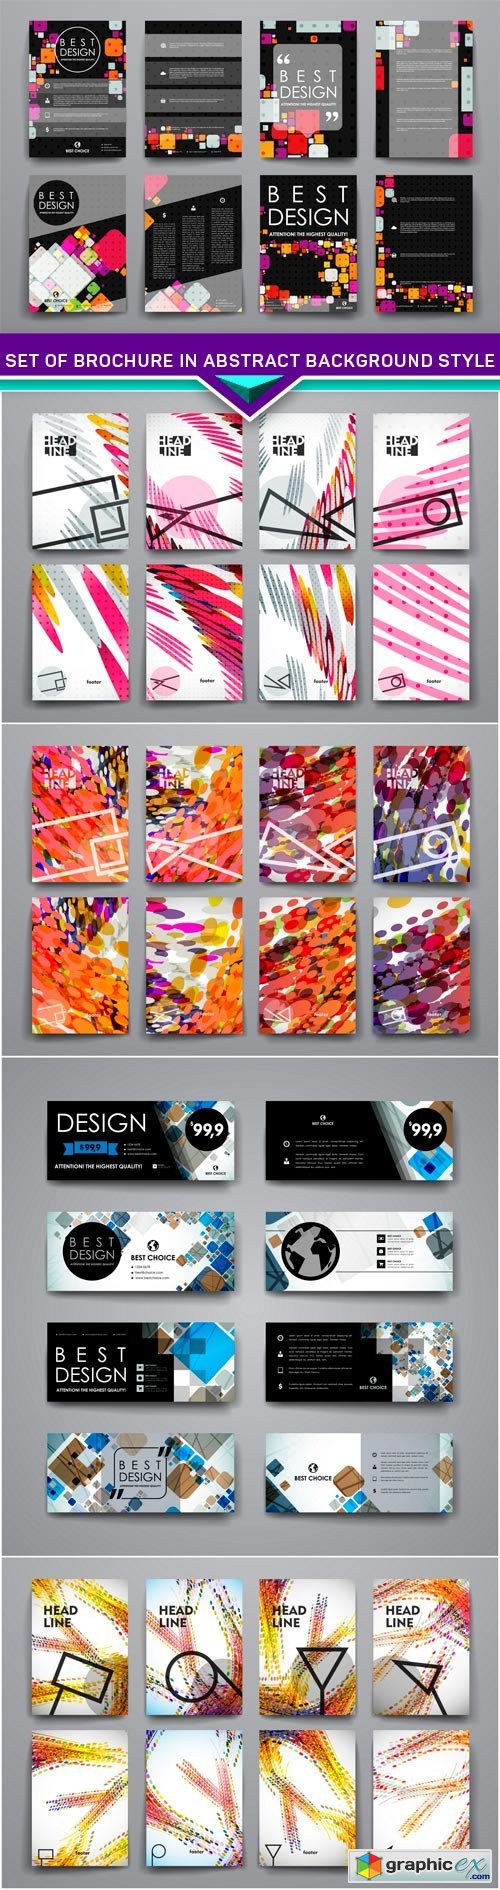 Set of brochure in abstract background style 5X EPS